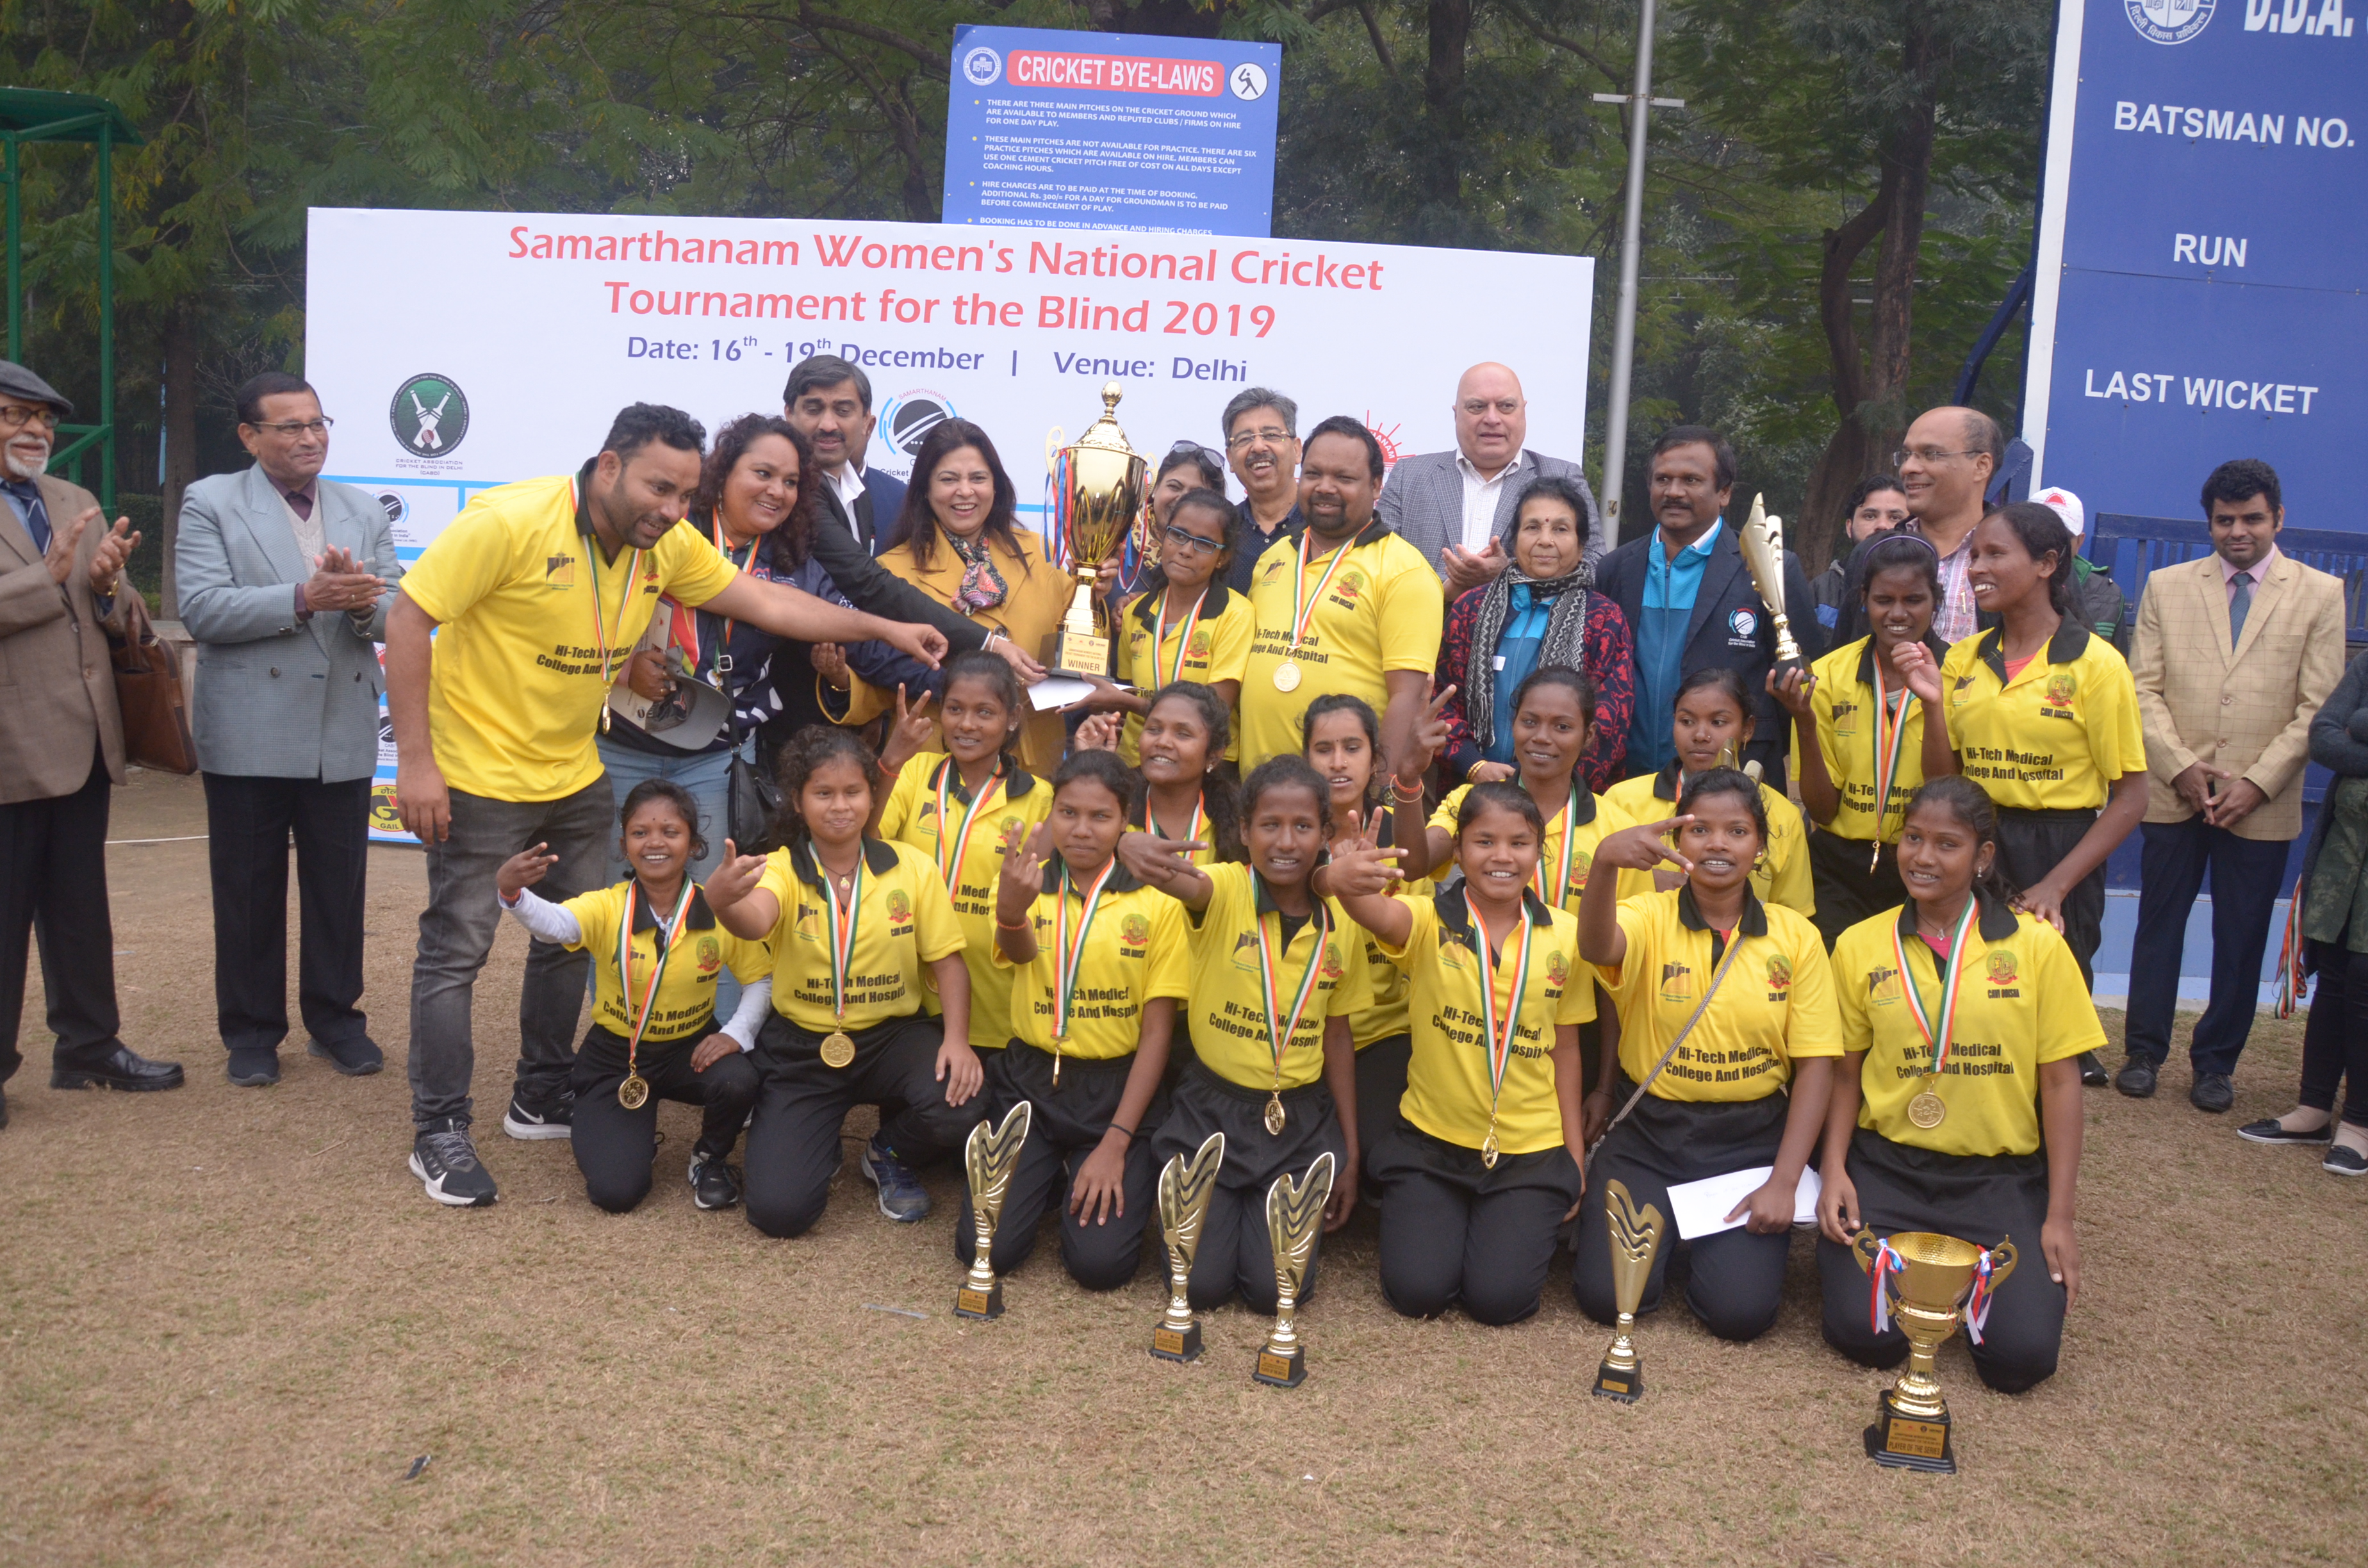 Odisha crowned inaugural champions of Samarthanam Women's National Cricket Tournament for the Blind – 2019